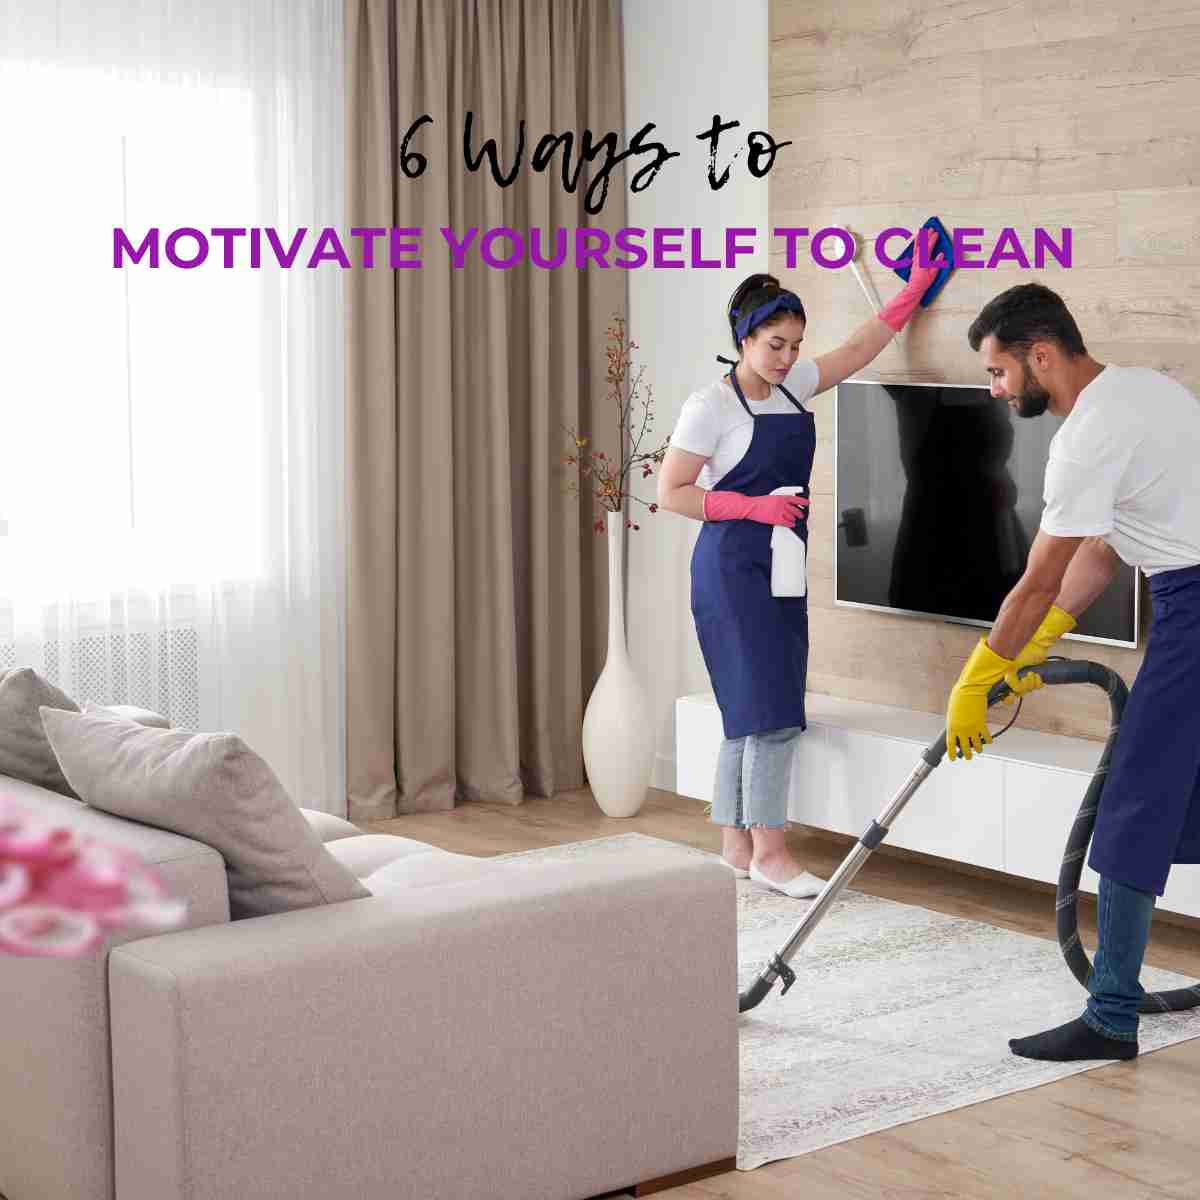 Motivate Yourself to Clean